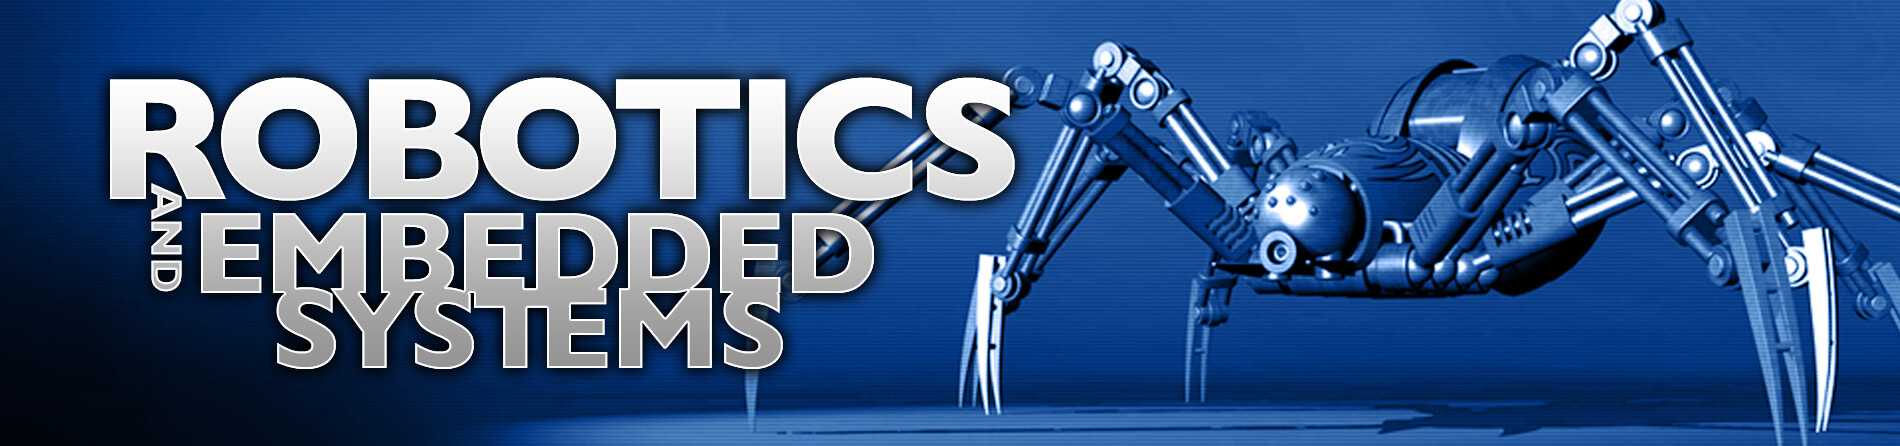 Robotics and Embedded Systems Degree Course List at University of Advancing Technology